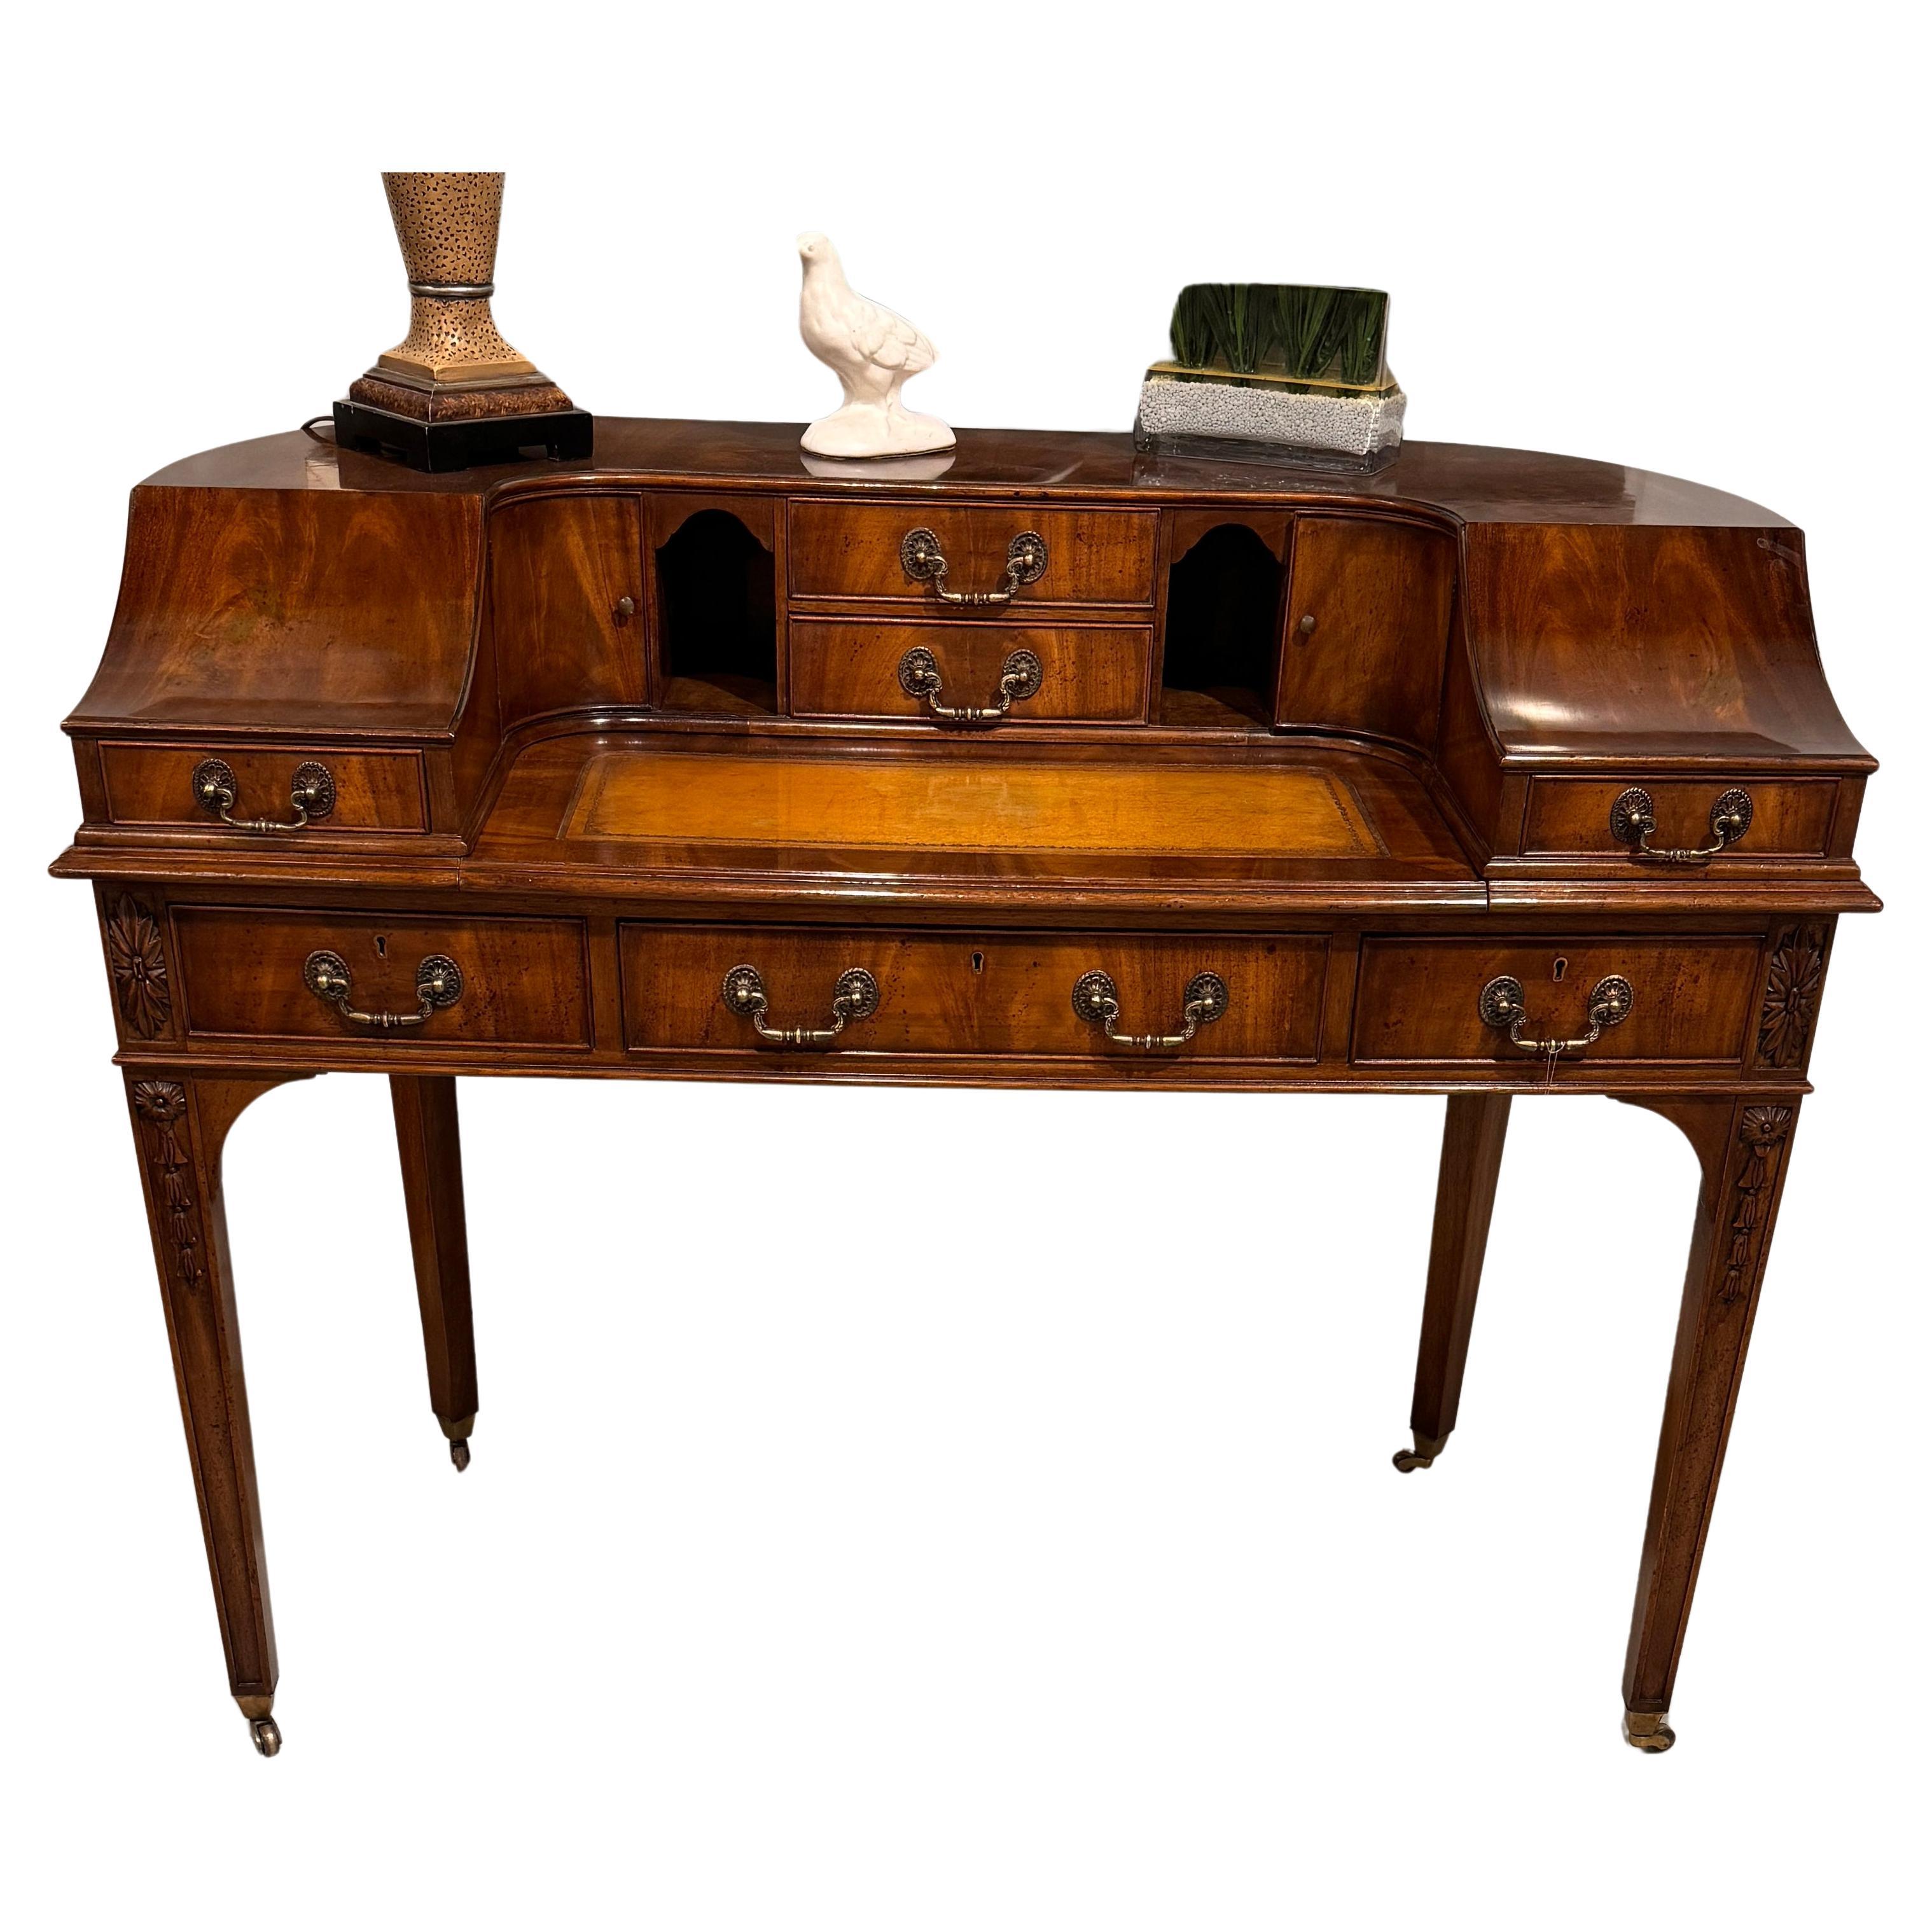 Here is our Vintage Carlton House Desk,  English Styling with Leather Writing Surface.  A lovely flamed mahogany veneer with a lively pattern make this a true show piece.  With seven drawers and two door cupboard storage area not only is this